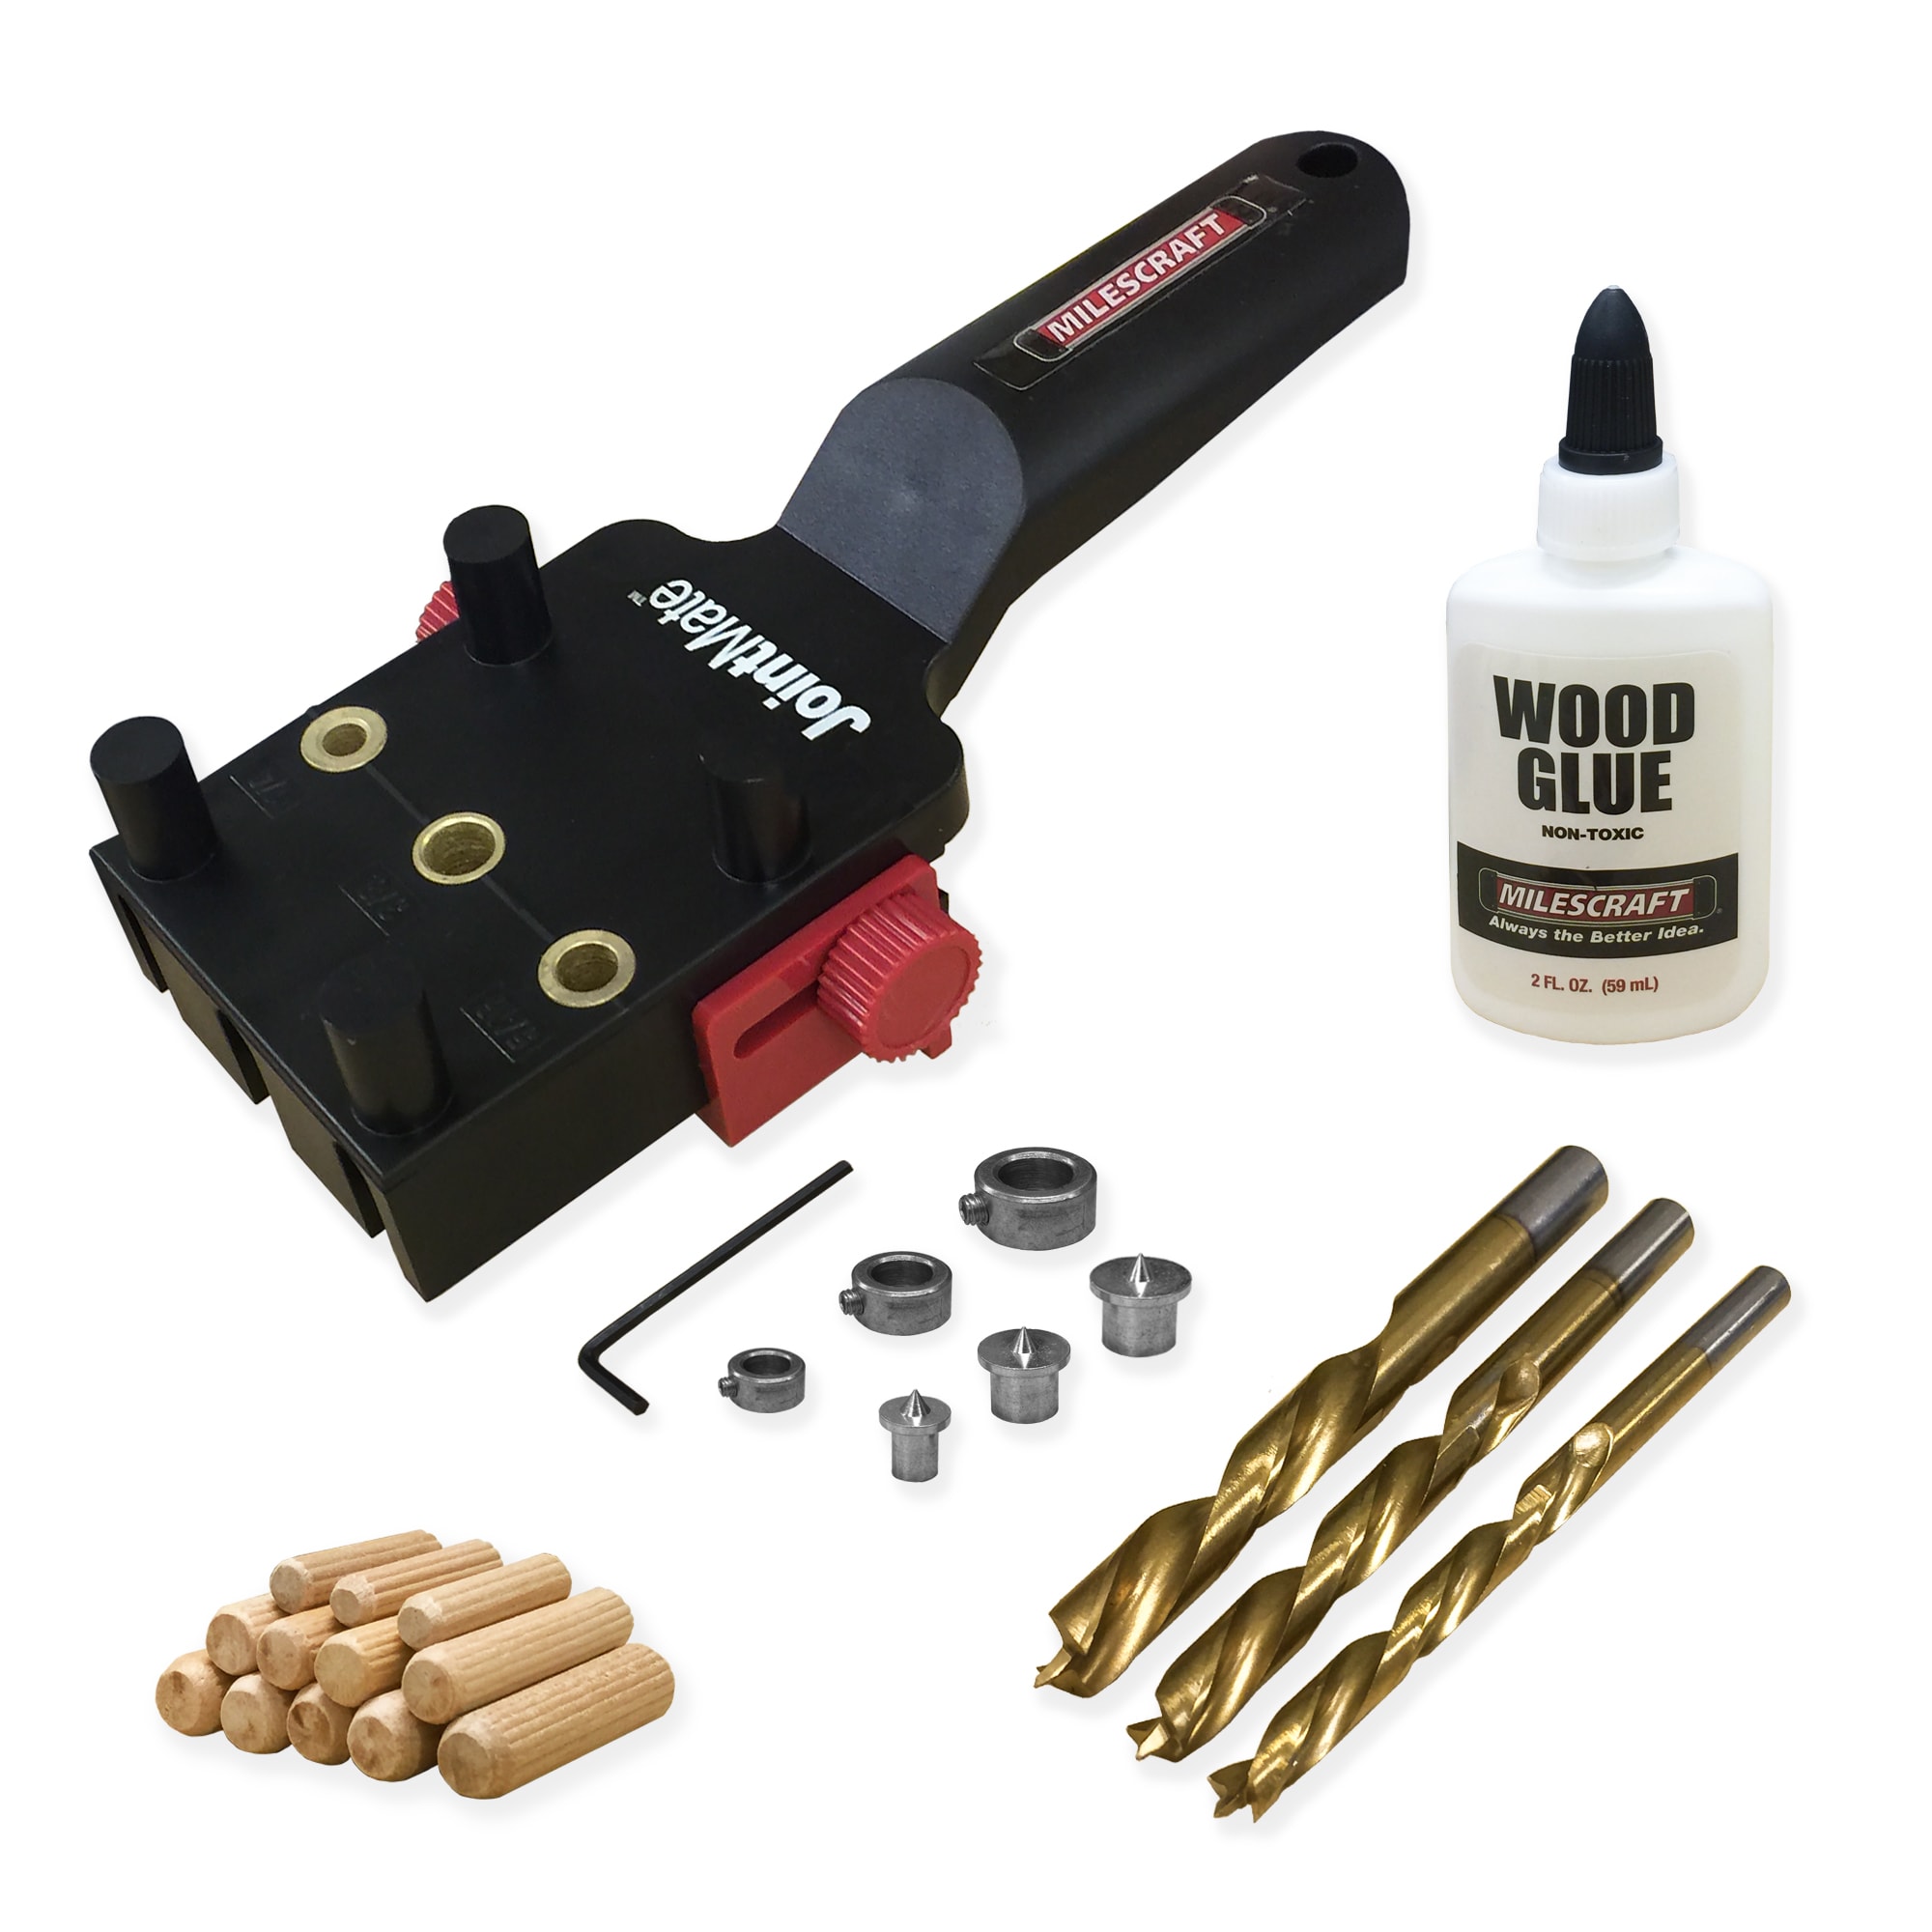 WORX MakerX Rotary Tool Accessory Kit for All Standard Rotary